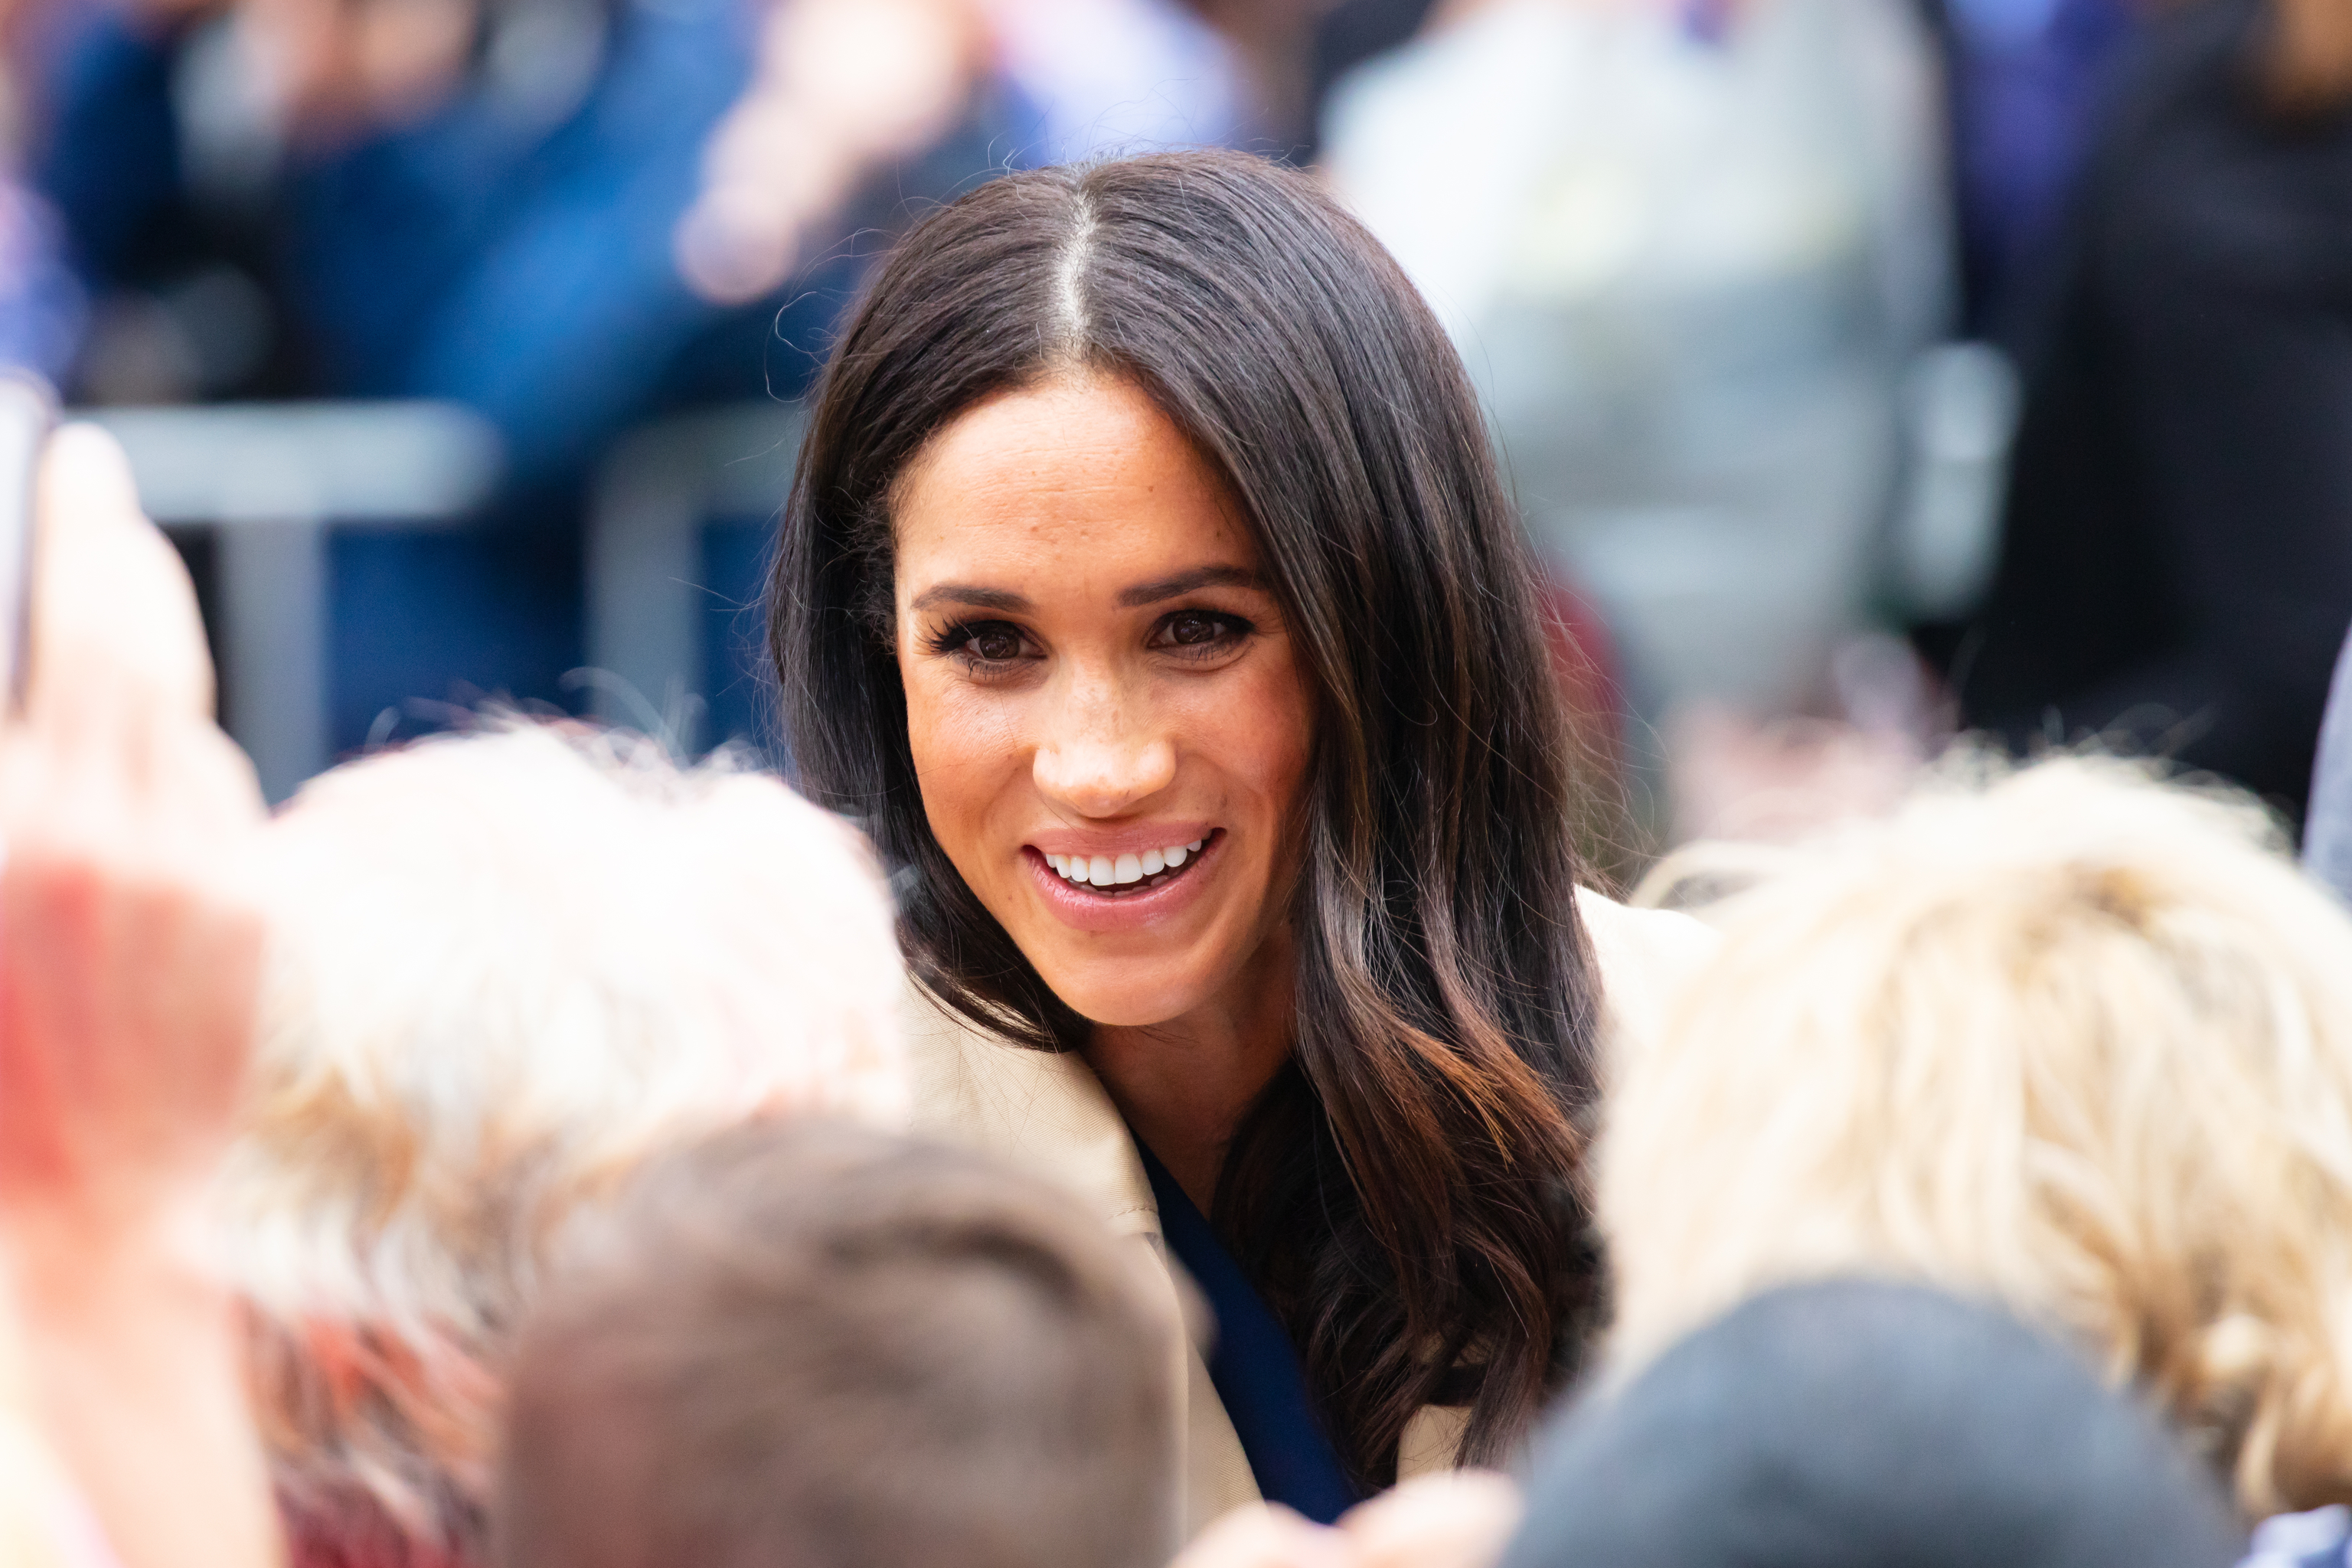 Meghan Markle greets fans outside Government House in Melbourne, Aus.